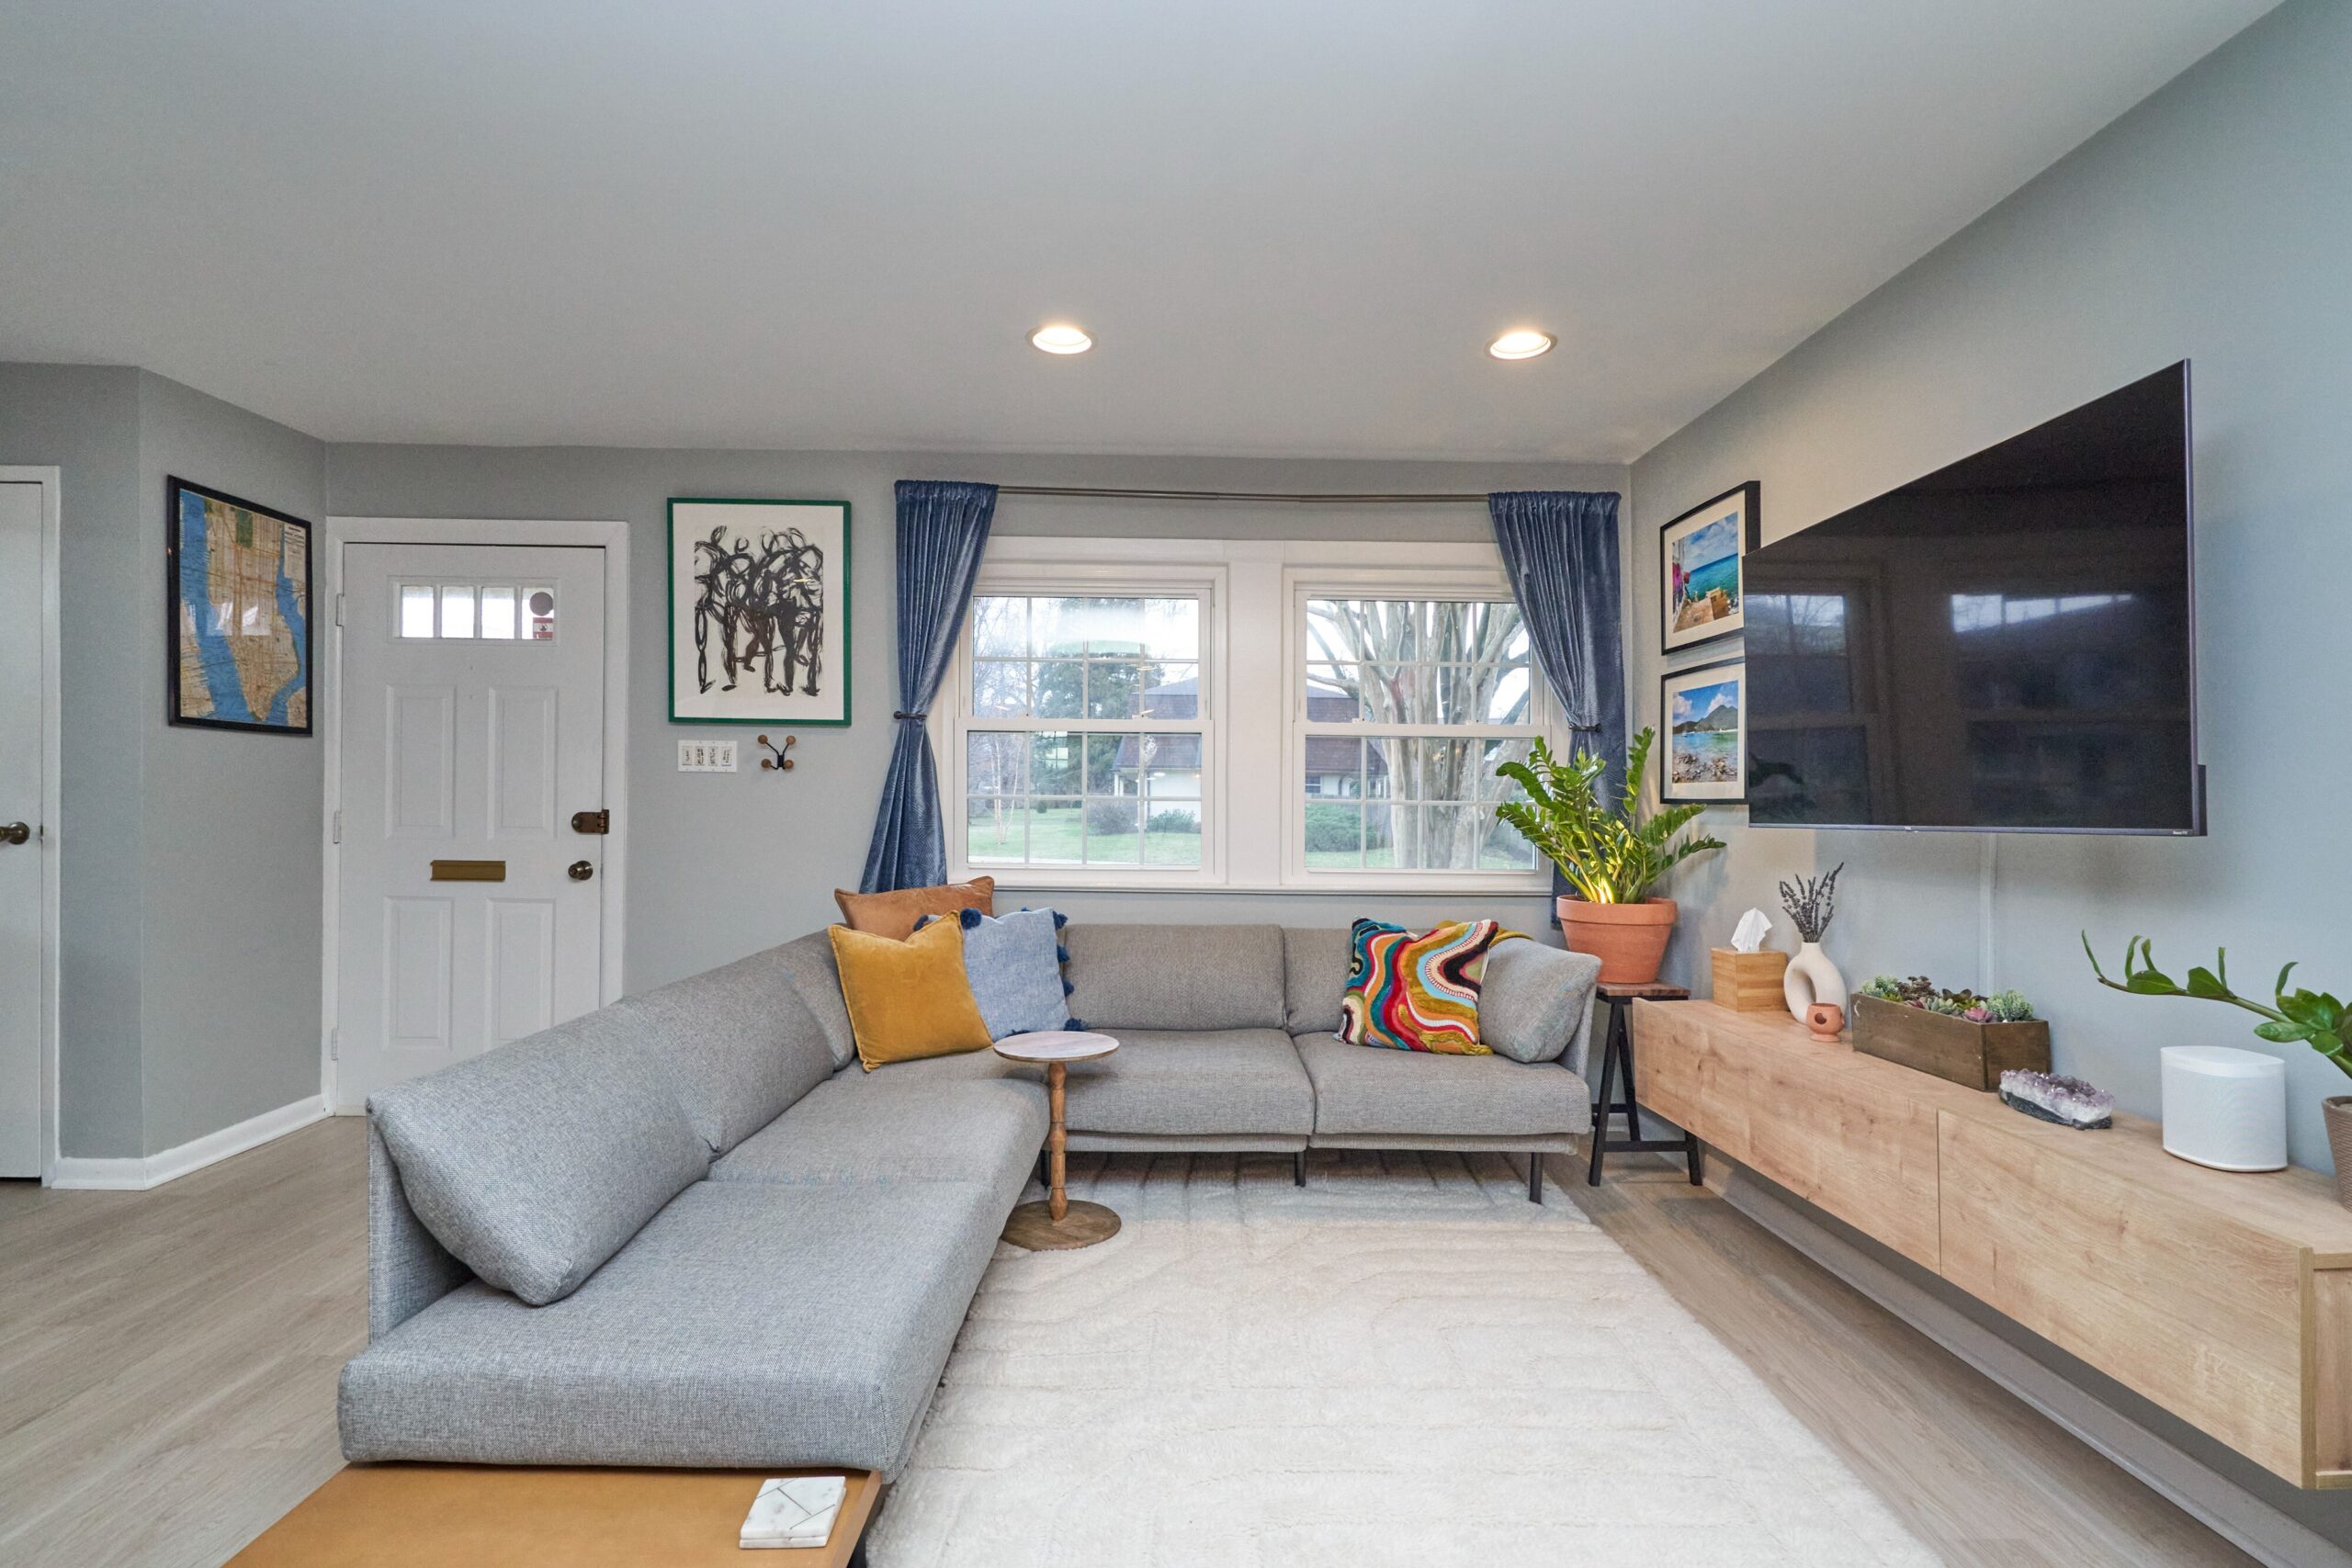 Professional interior photo of 415 James Ct in Falls Church City - showing the main floor living space with bright living room, modern furniture and mounted flat screen tv